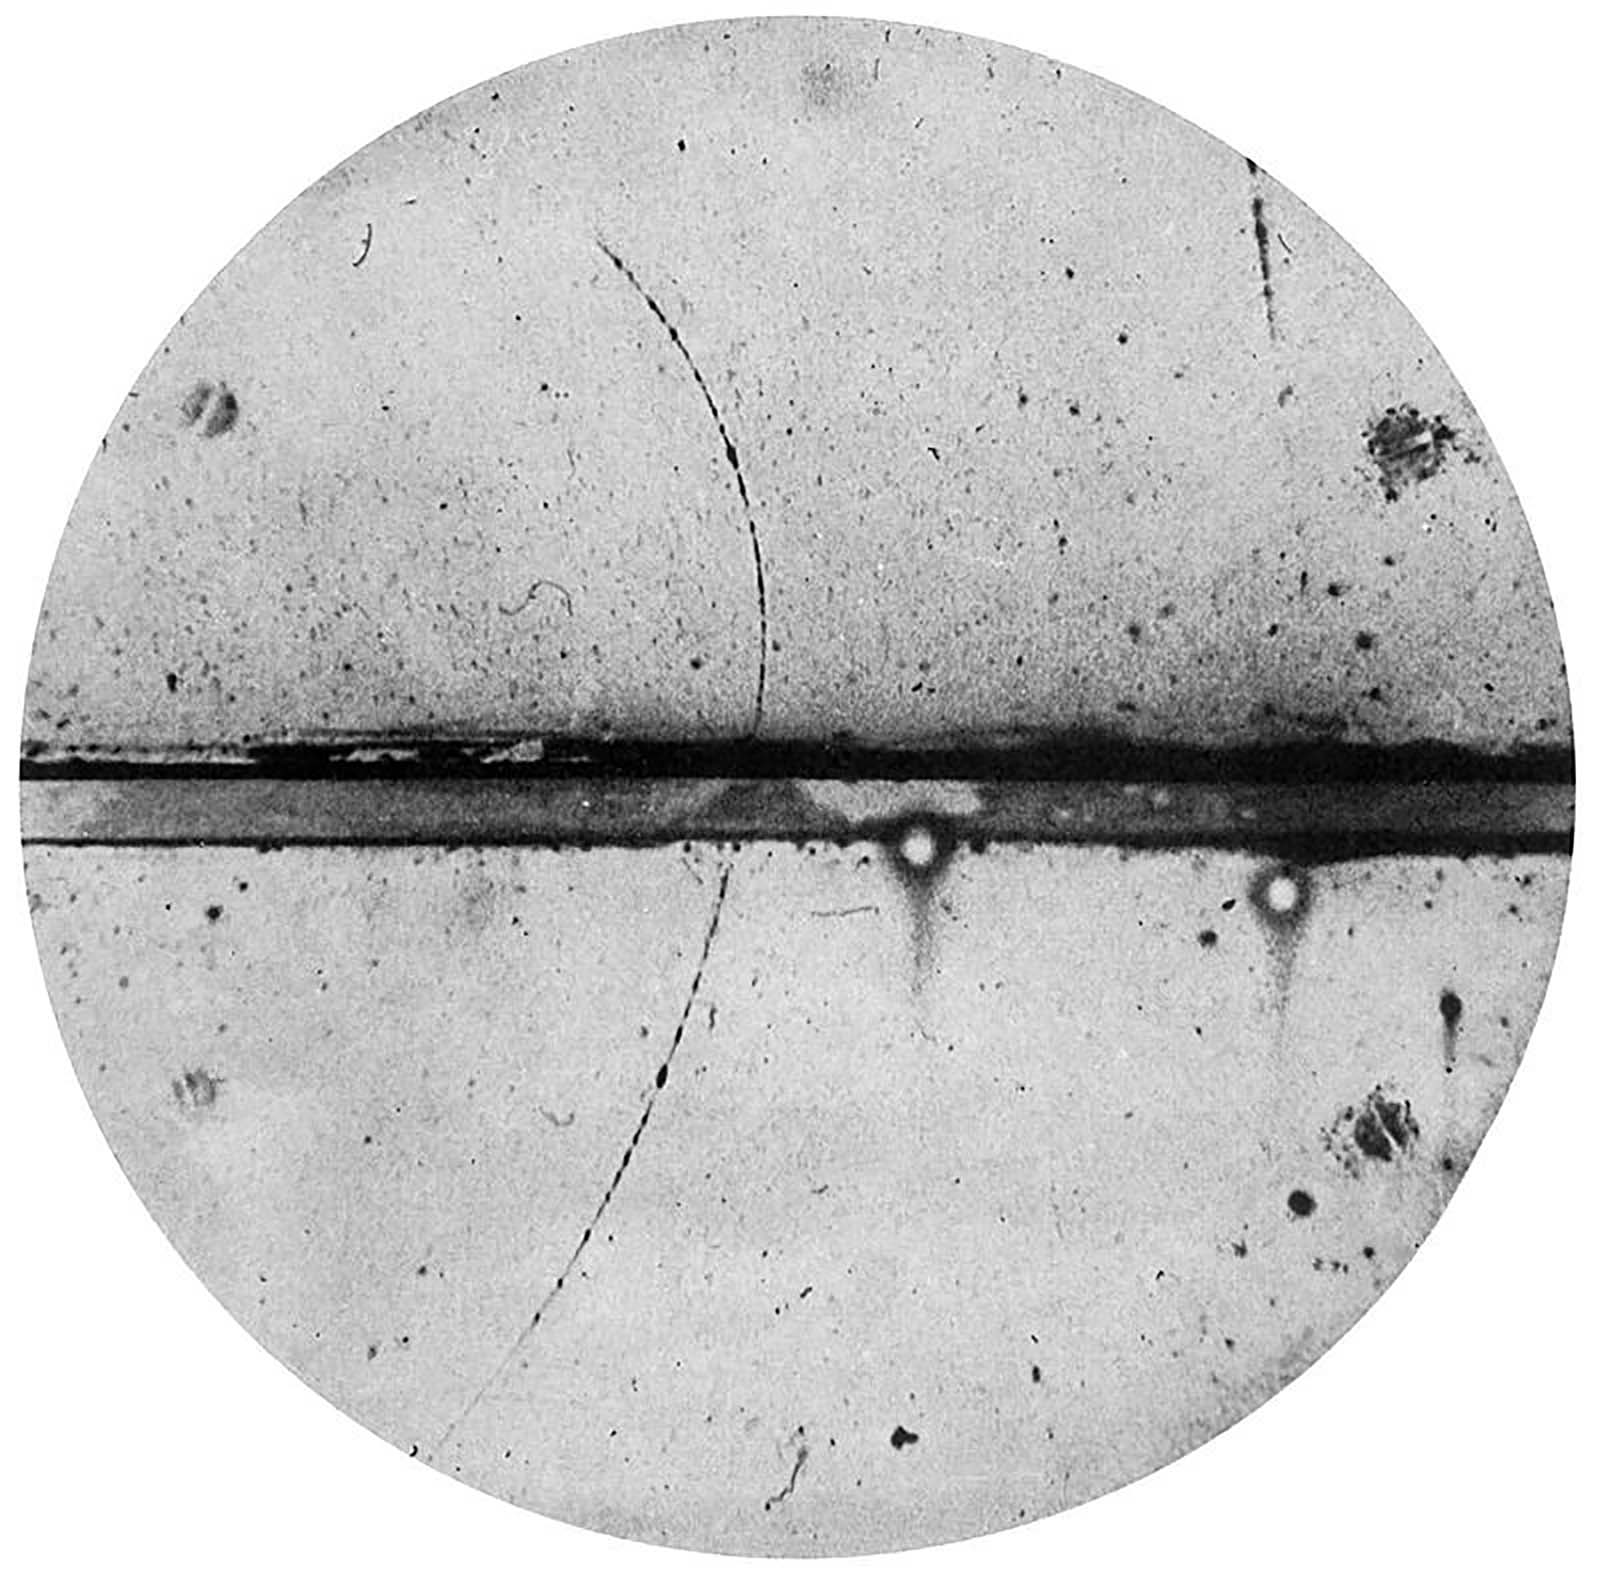 Carl Anderson, Cloud Chamber Photograph of a Positron, 1932